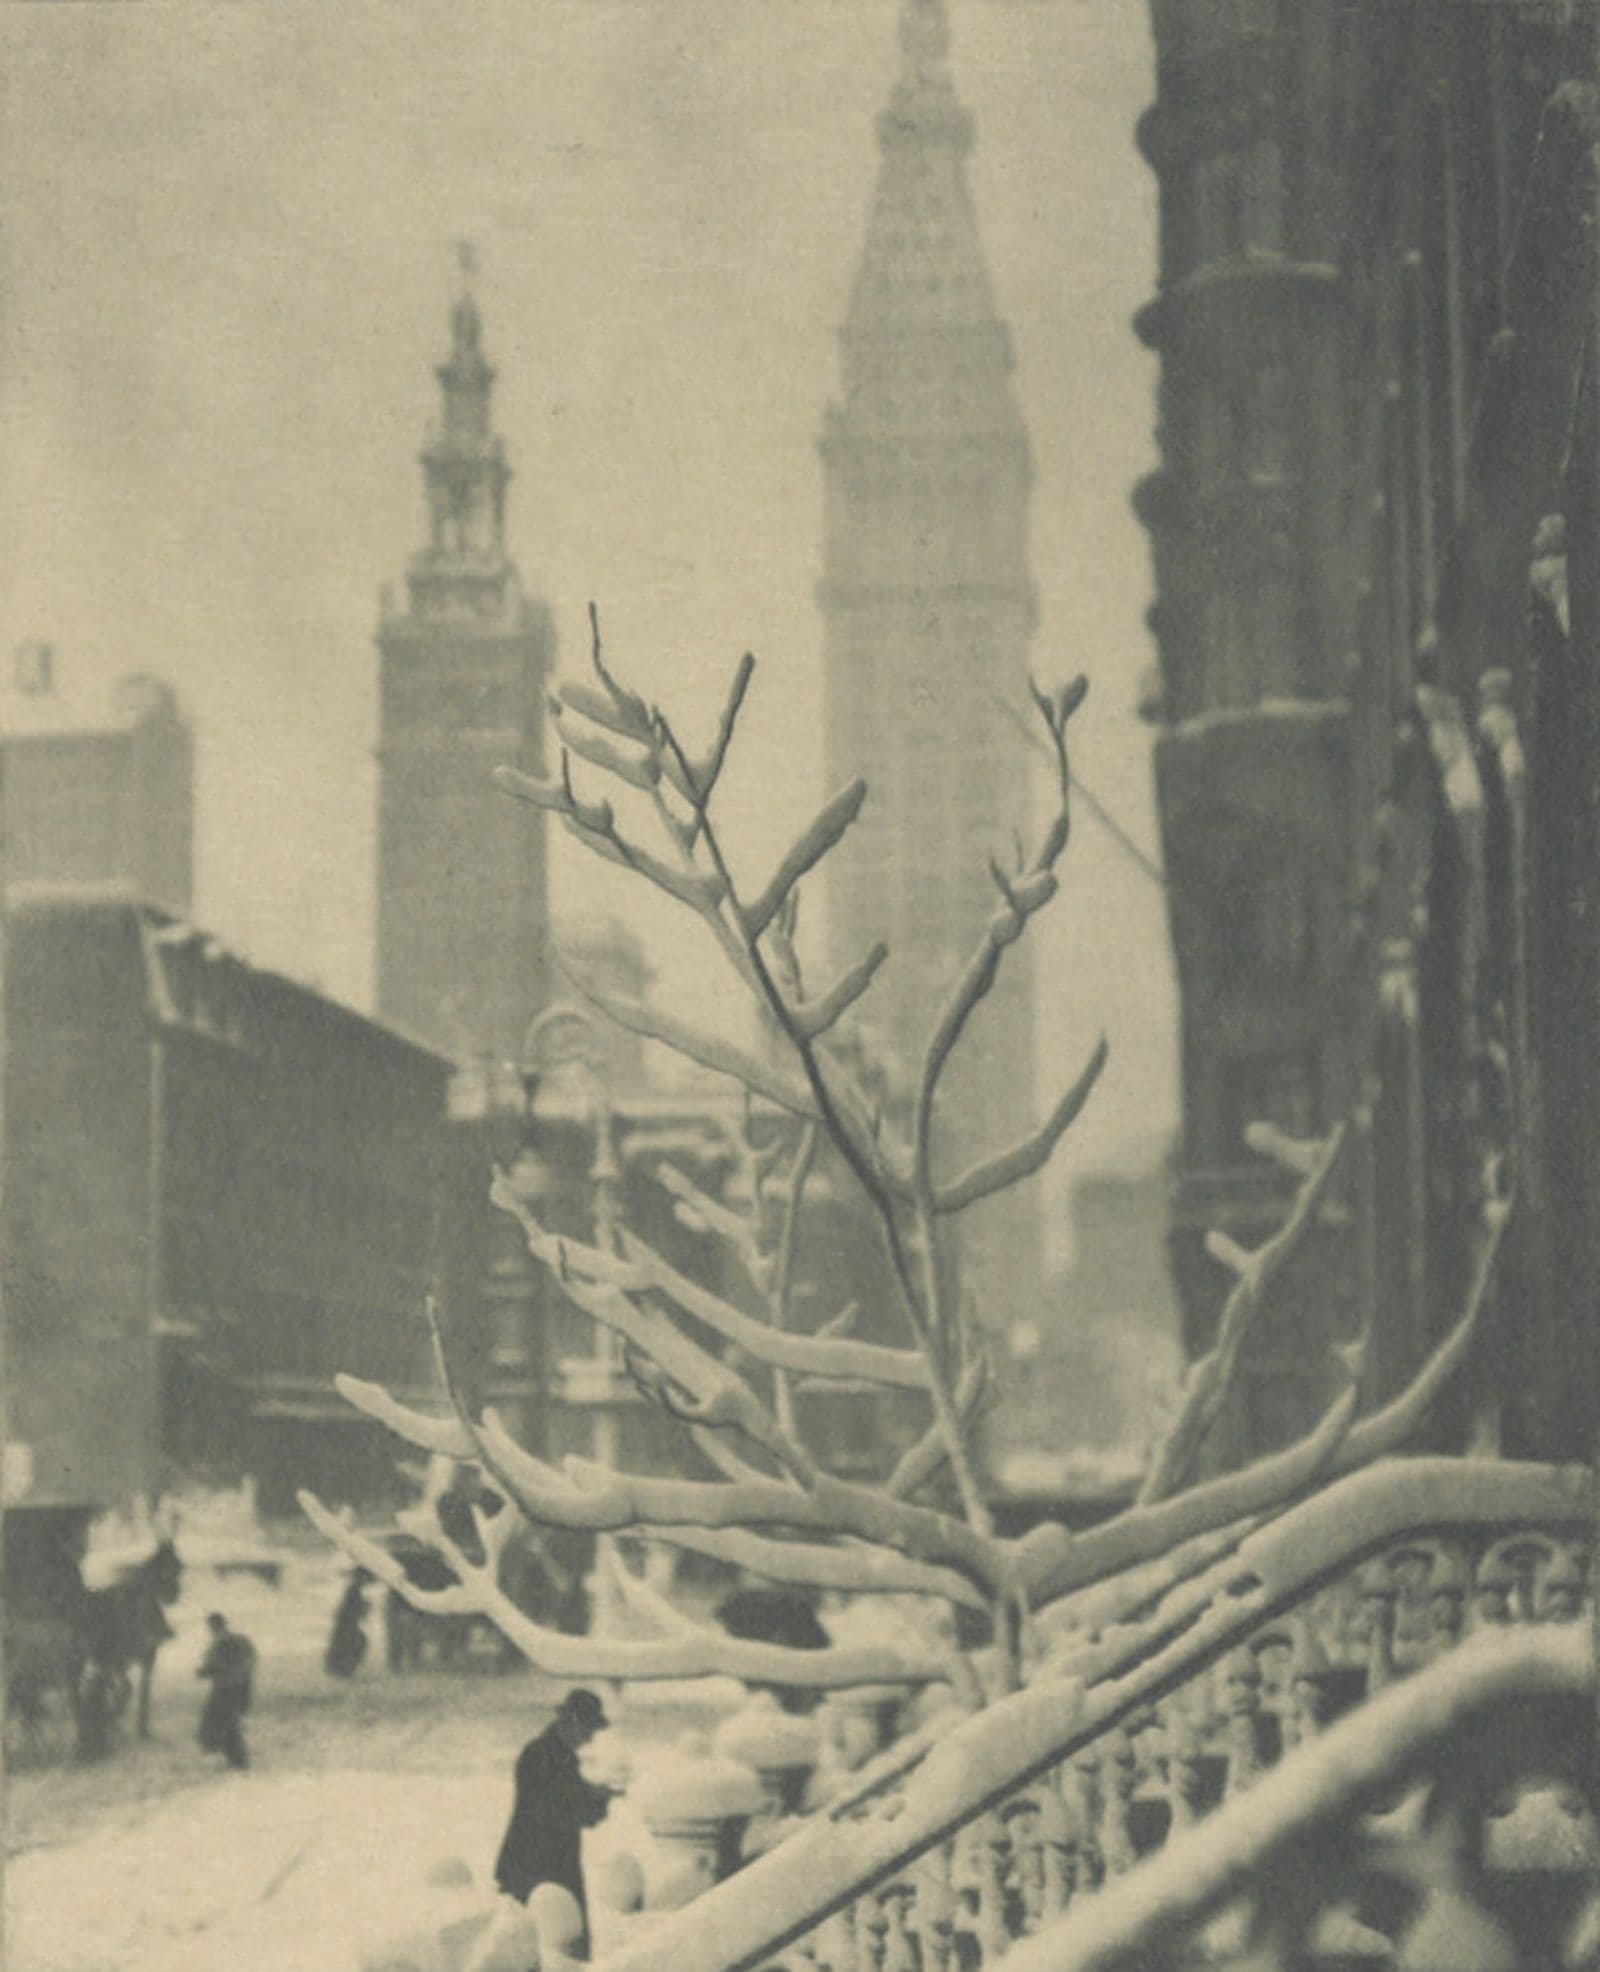 New York street scene with a snow-covered tree and street, and two large building in the background